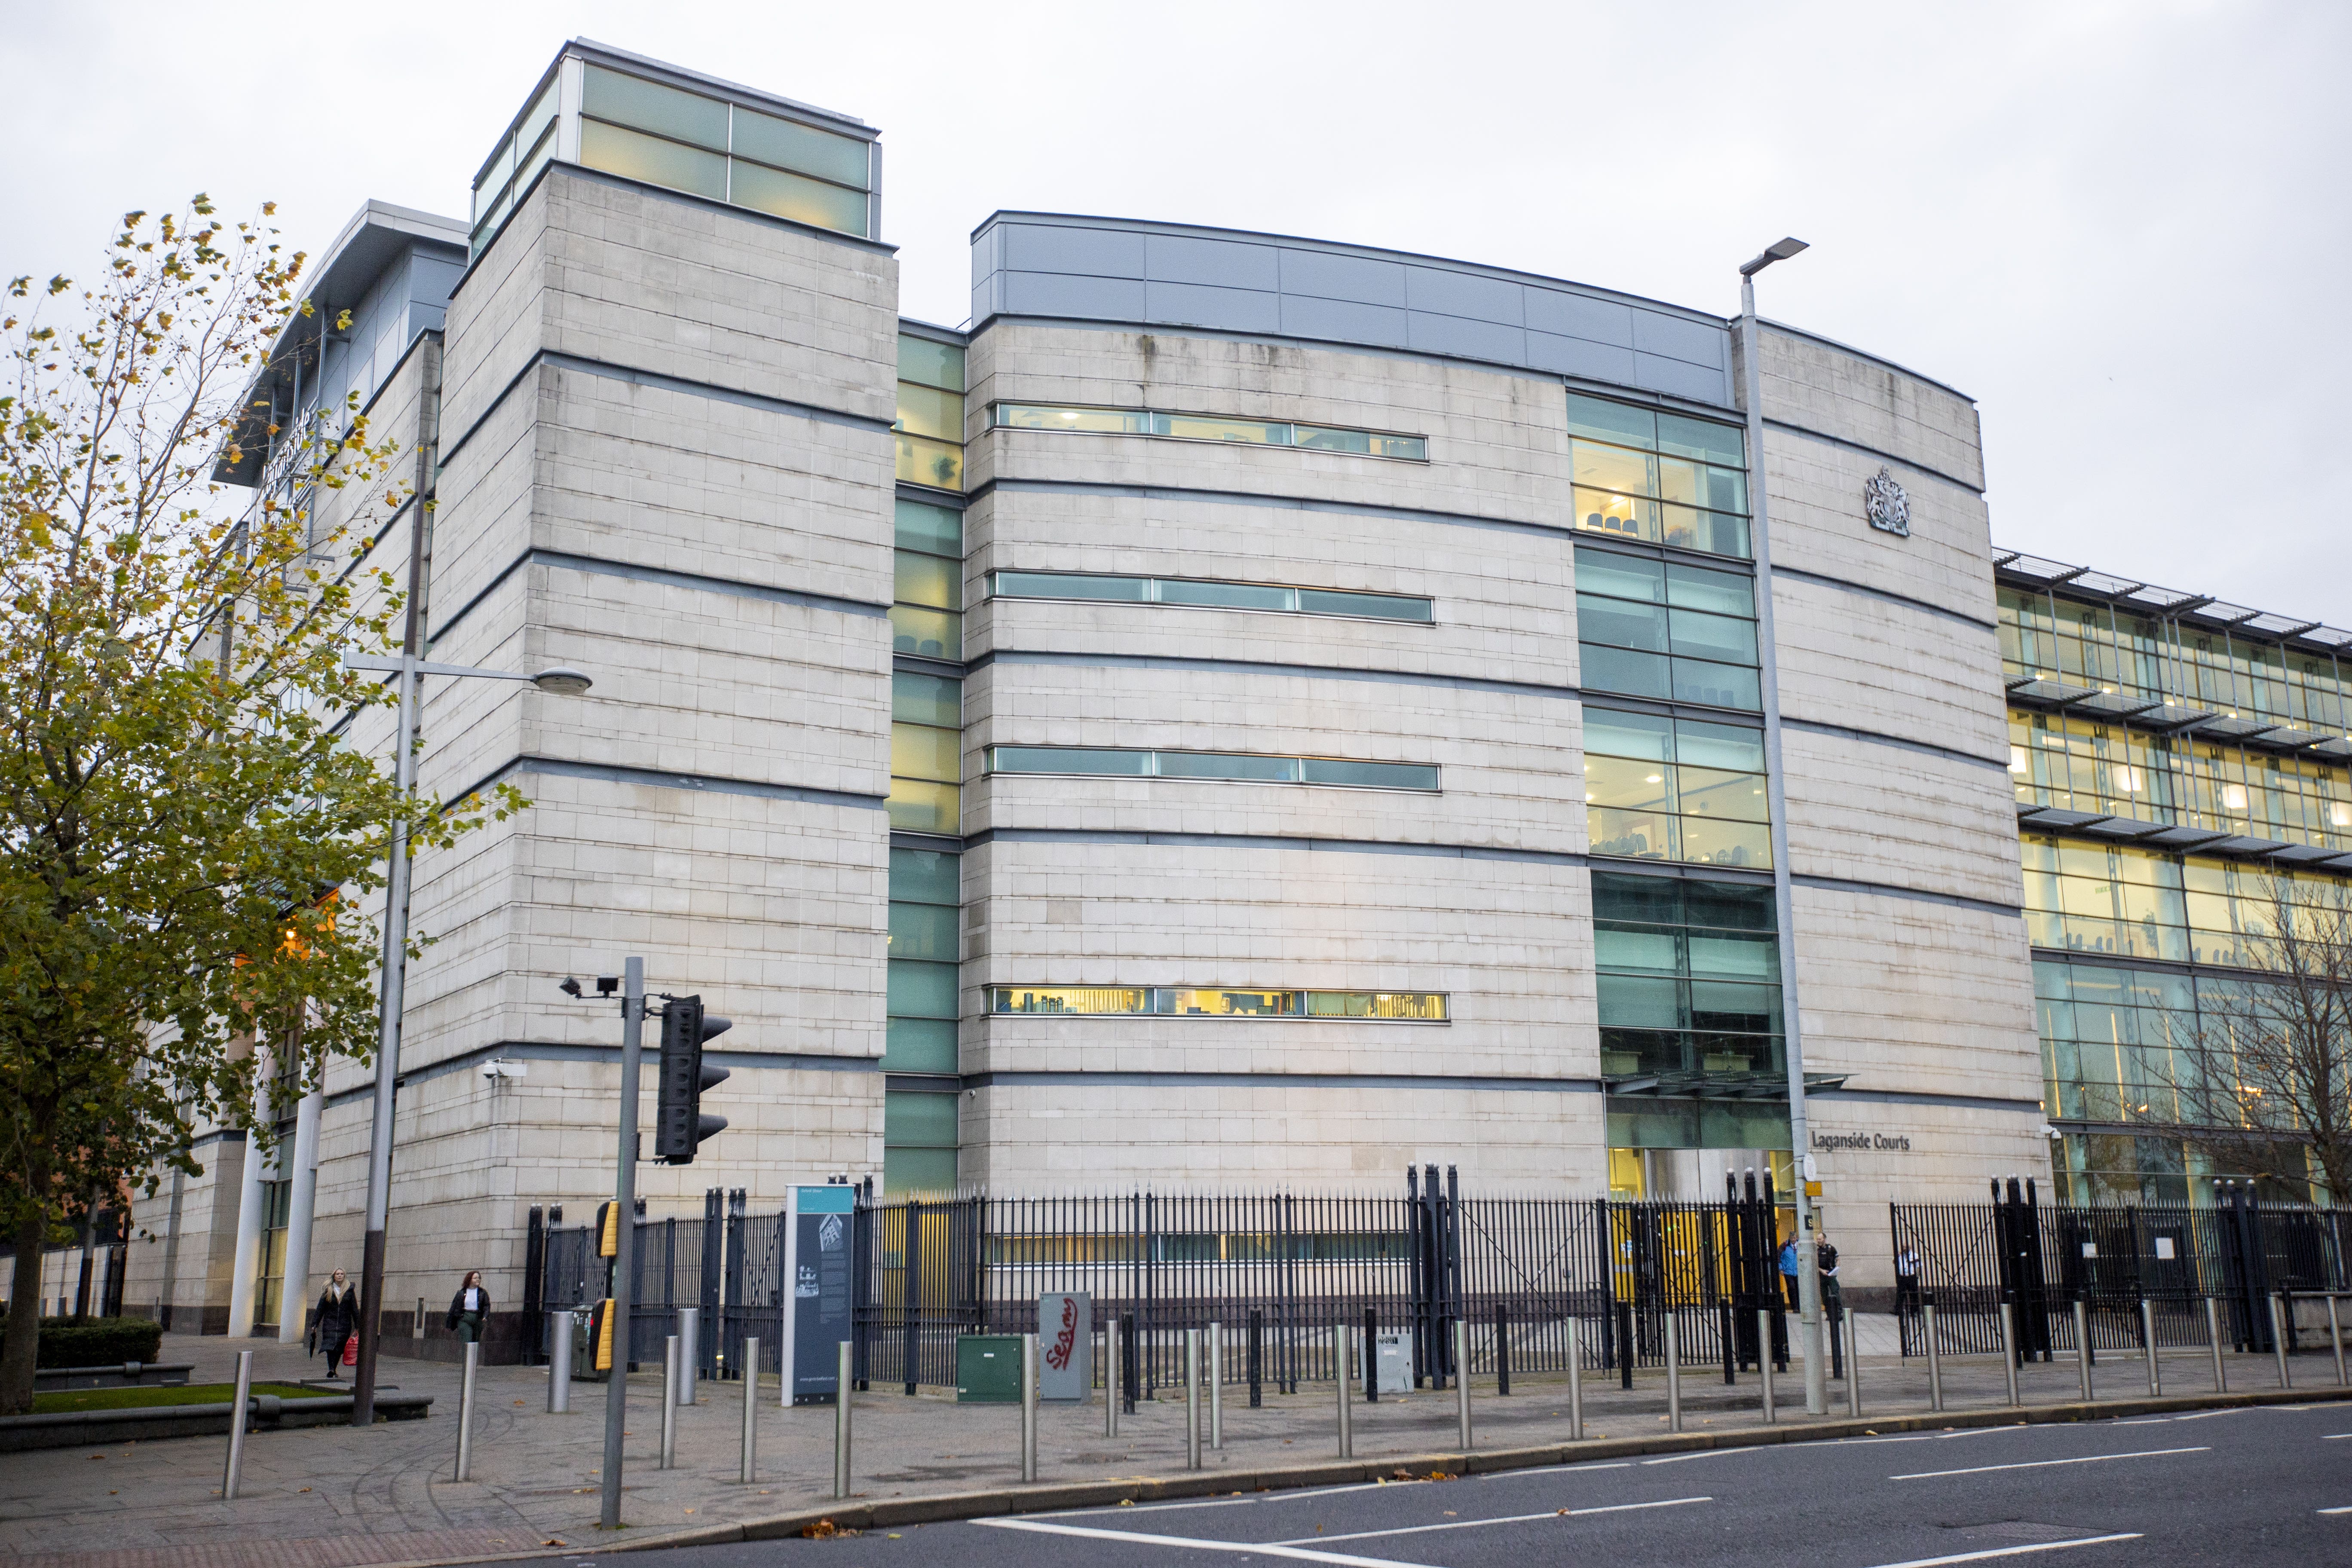 The sentencing took place at Laganside Courthouse in Belfast